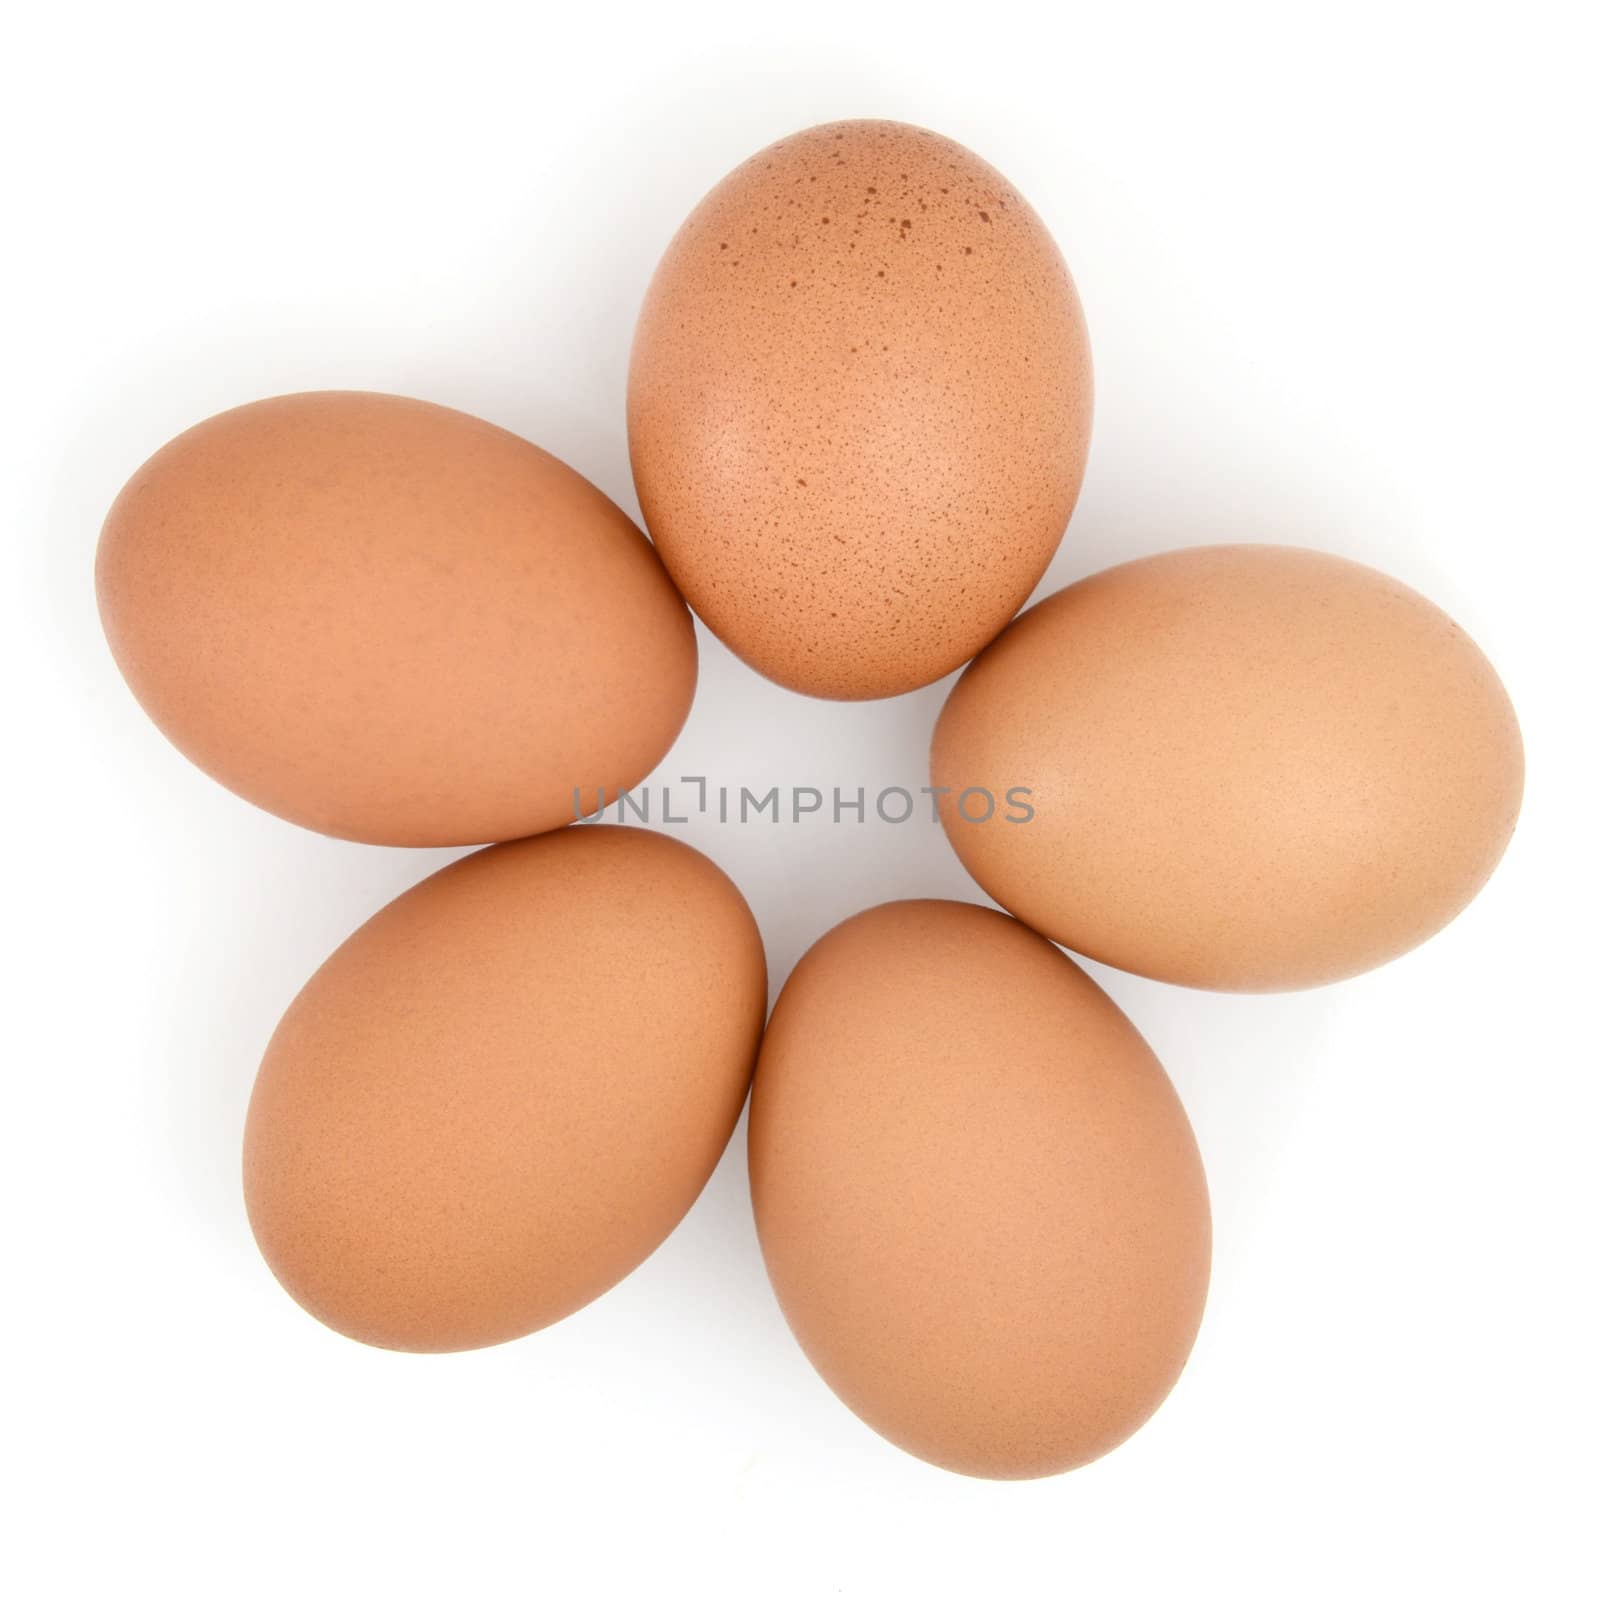 Five Eggs Isolated